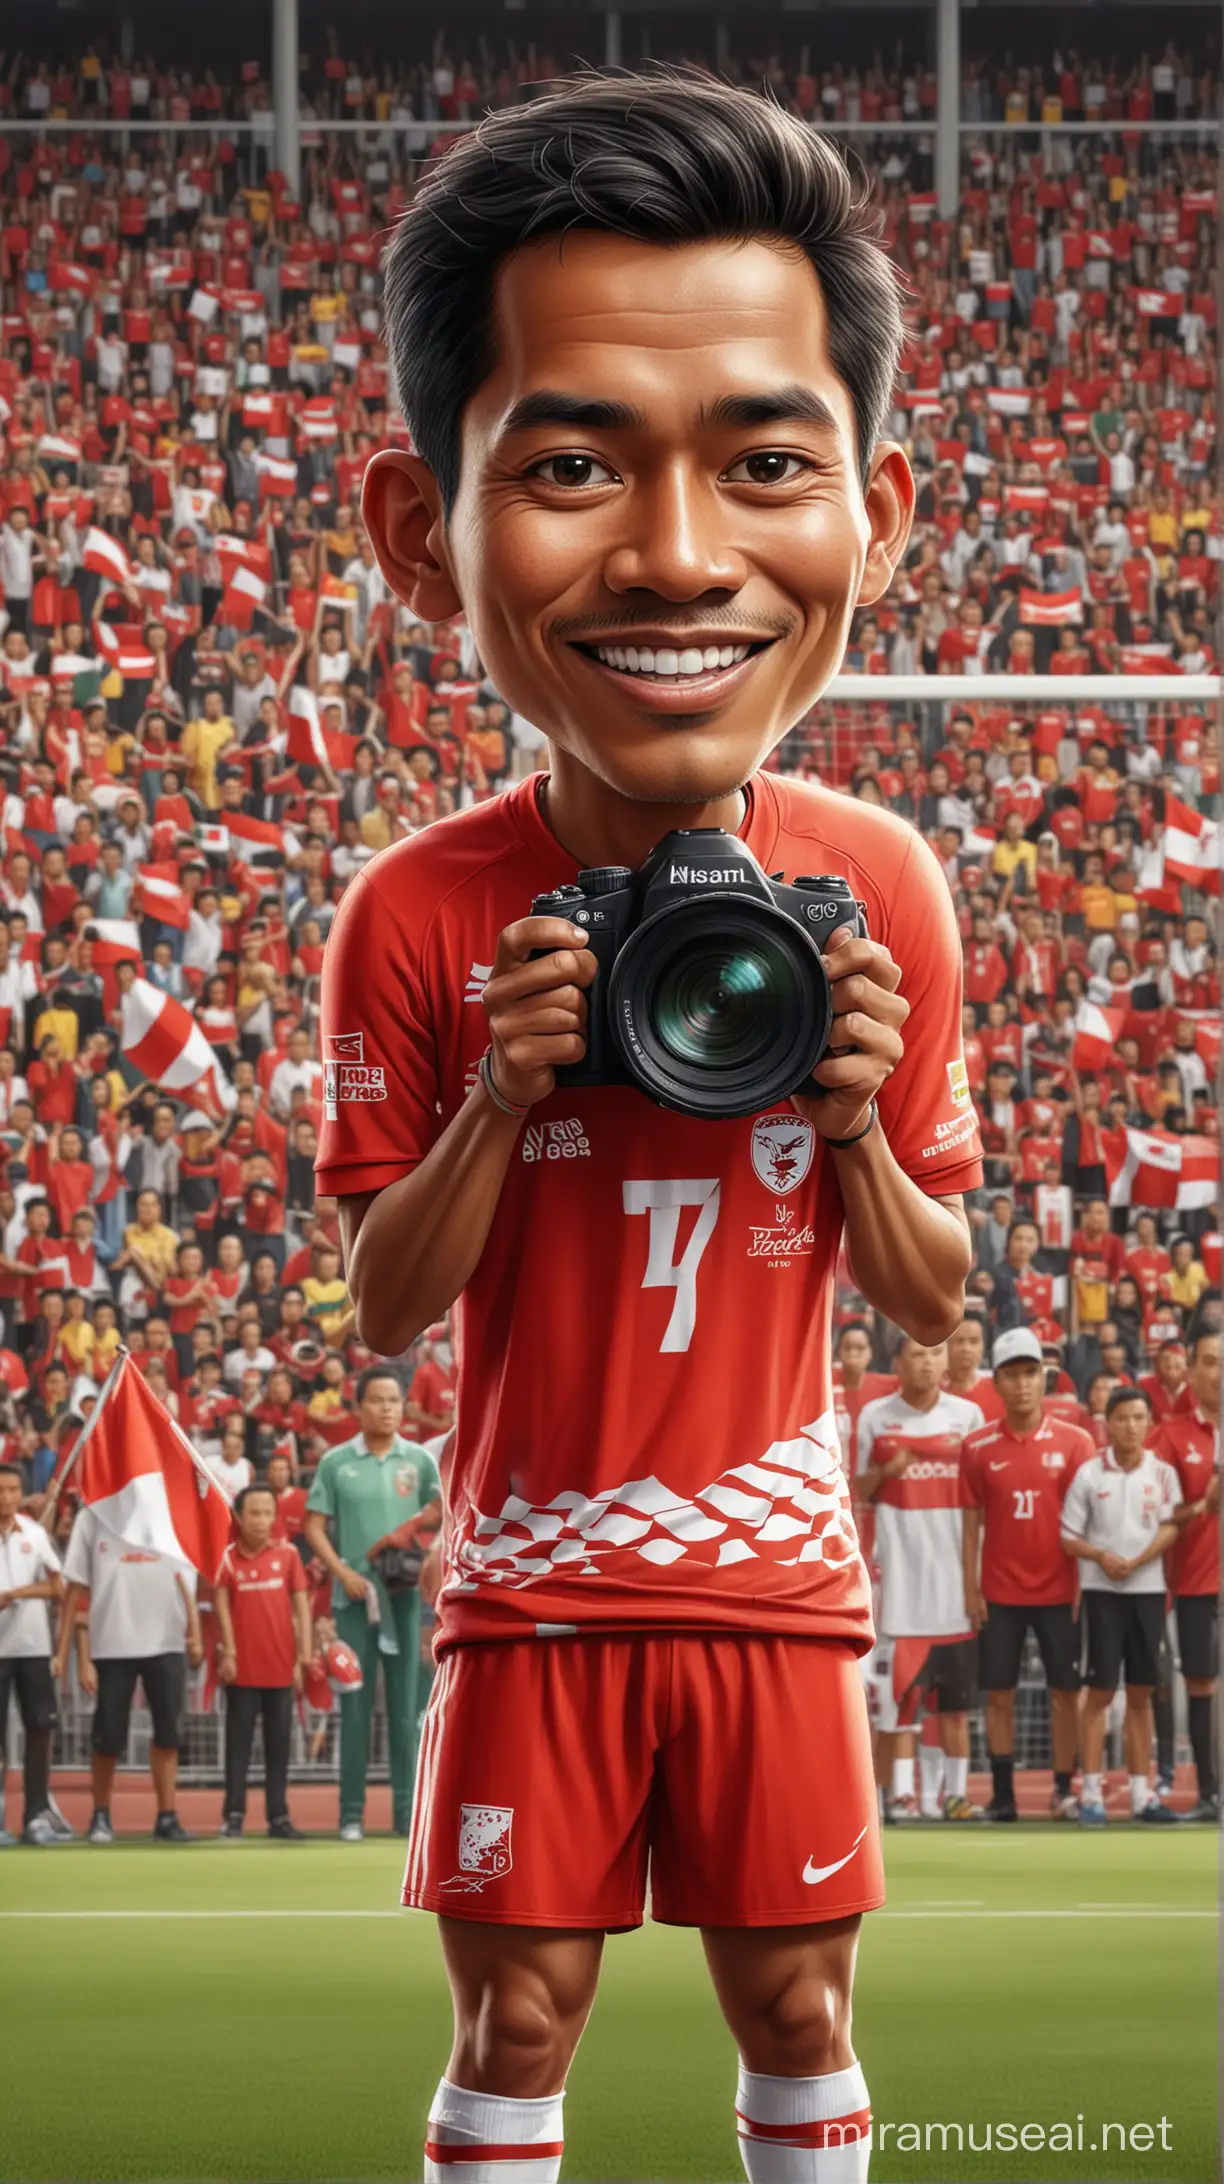 The animated caricature image depicts an Indonesian man with a clean and handsome face, holding a camera with a telephoto lens, dressed in the Indonesian national team jersey, with many Indonesian supporters in the background at a Football Stadium.